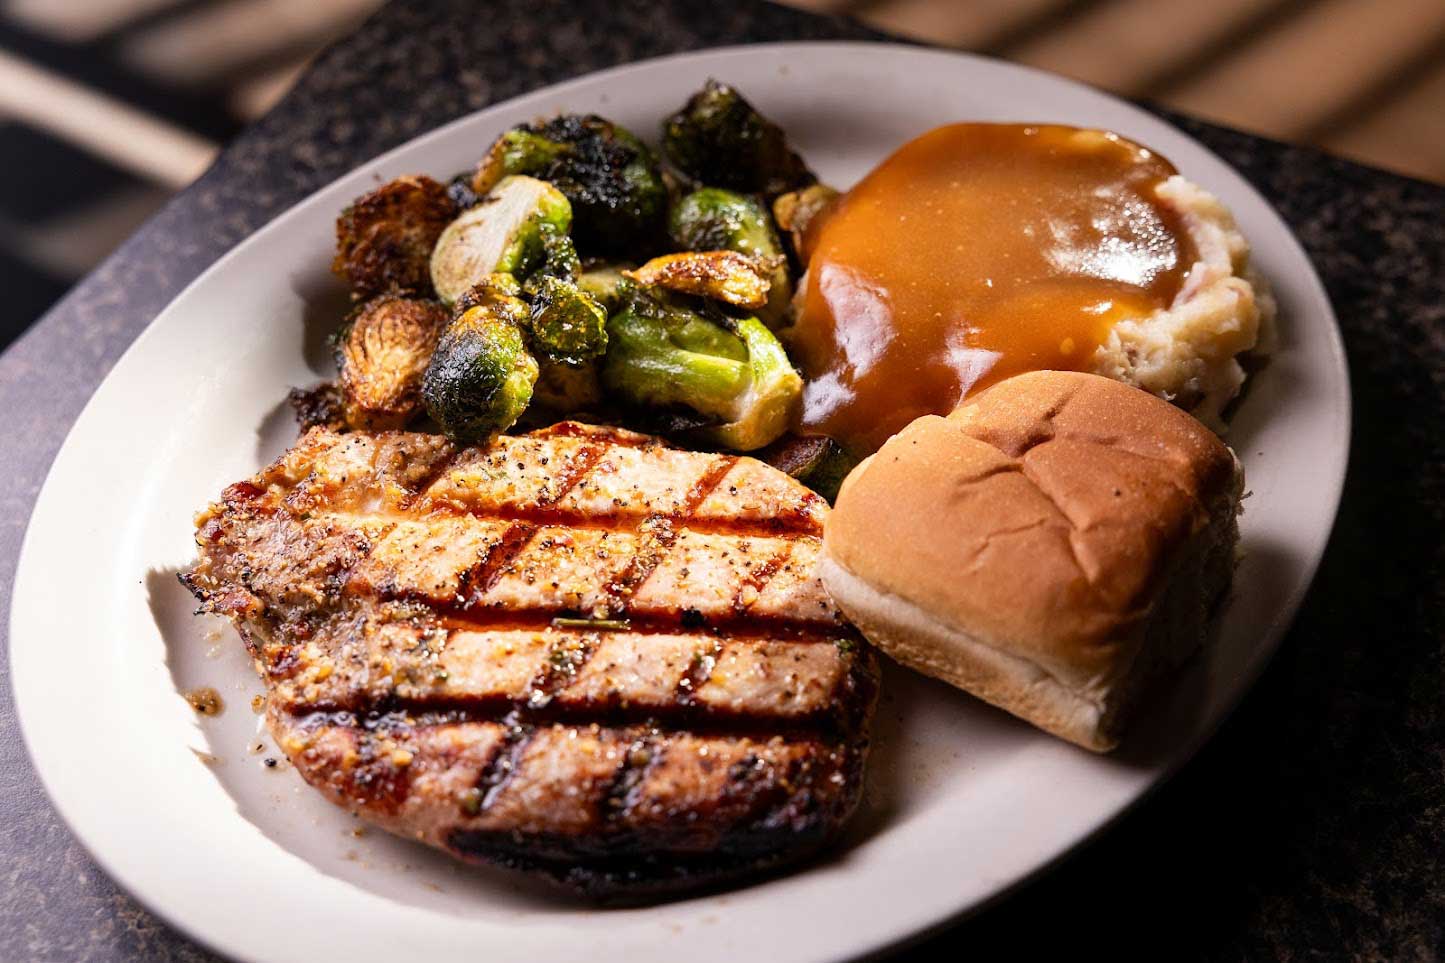 Pork chops  brussel sprouts, and mashed potatoes and gravy 